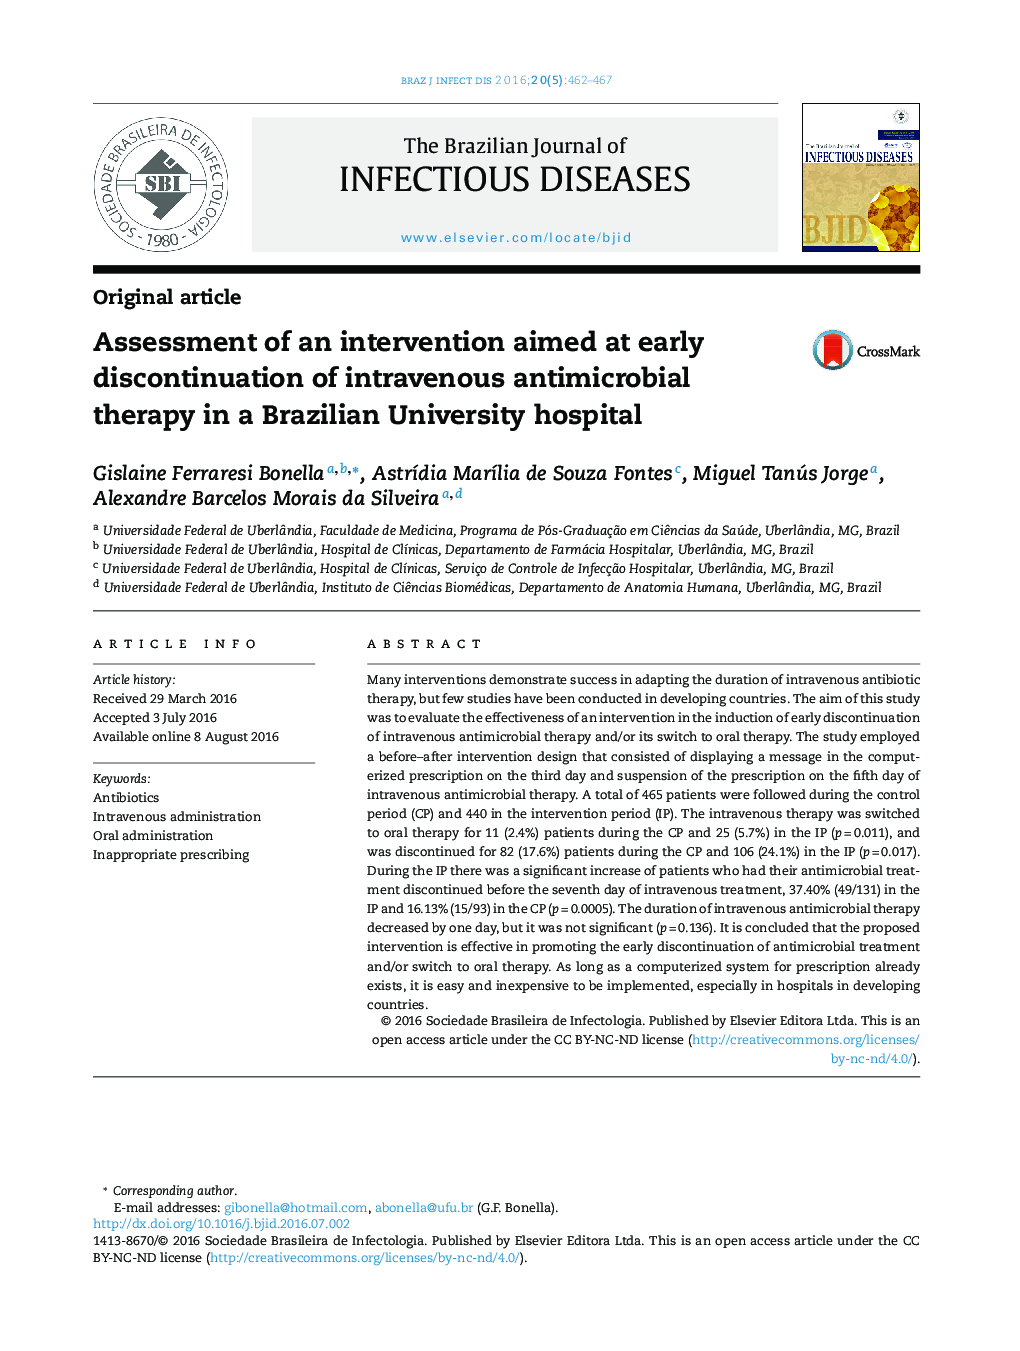 Assessment of an intervention aimed at early discontinuation of intravenous antimicrobial therapy in a Brazilian University hospital